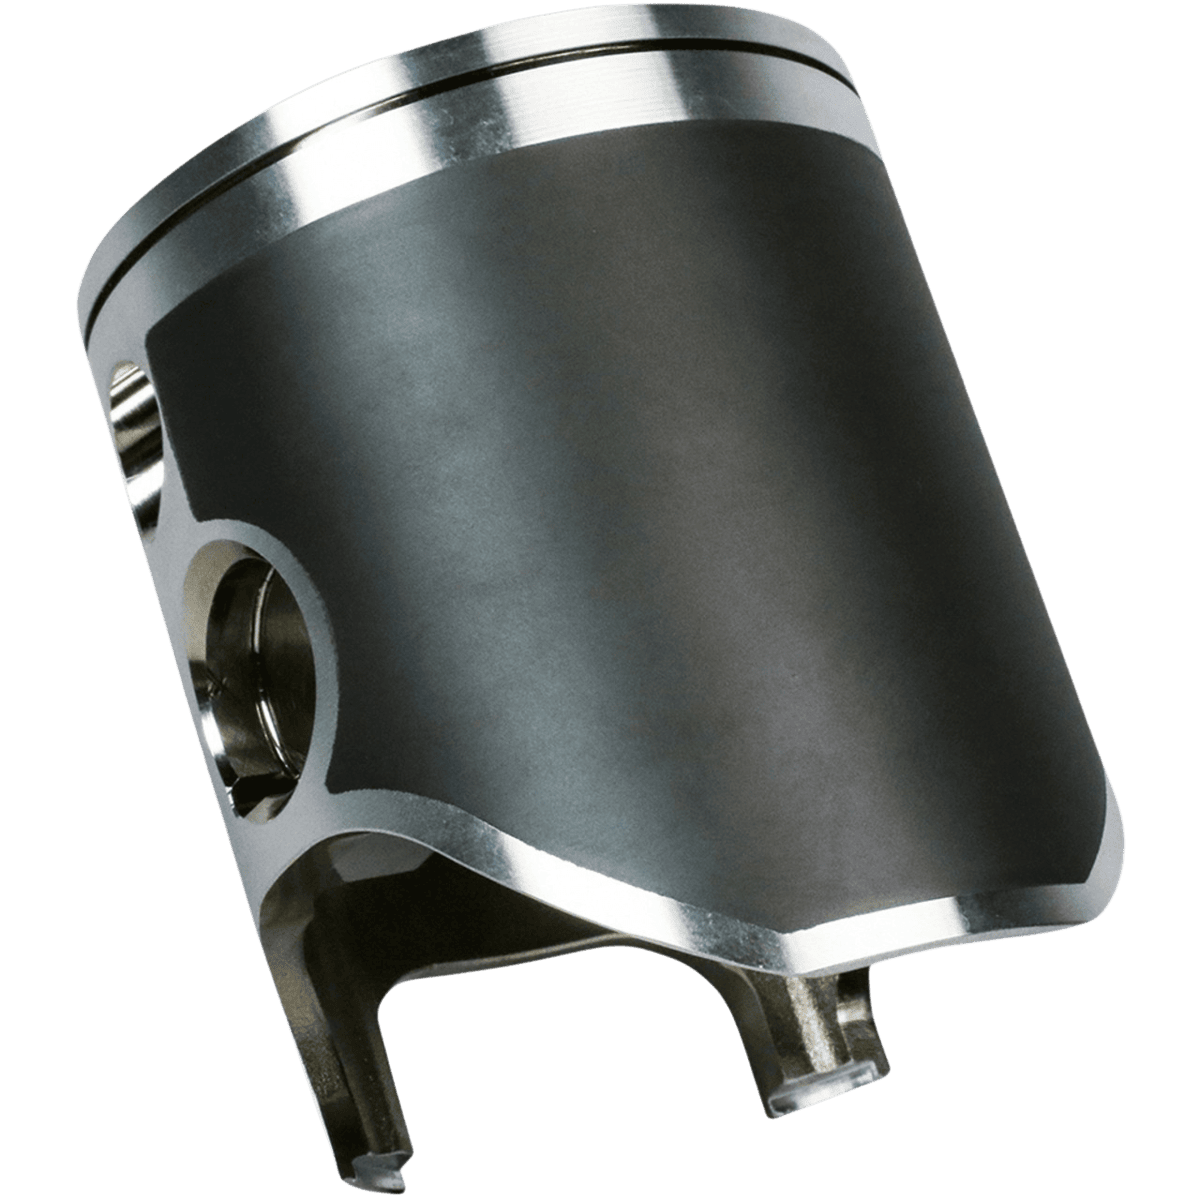 Best 1984 WR400 Piston Kit for Two strokes